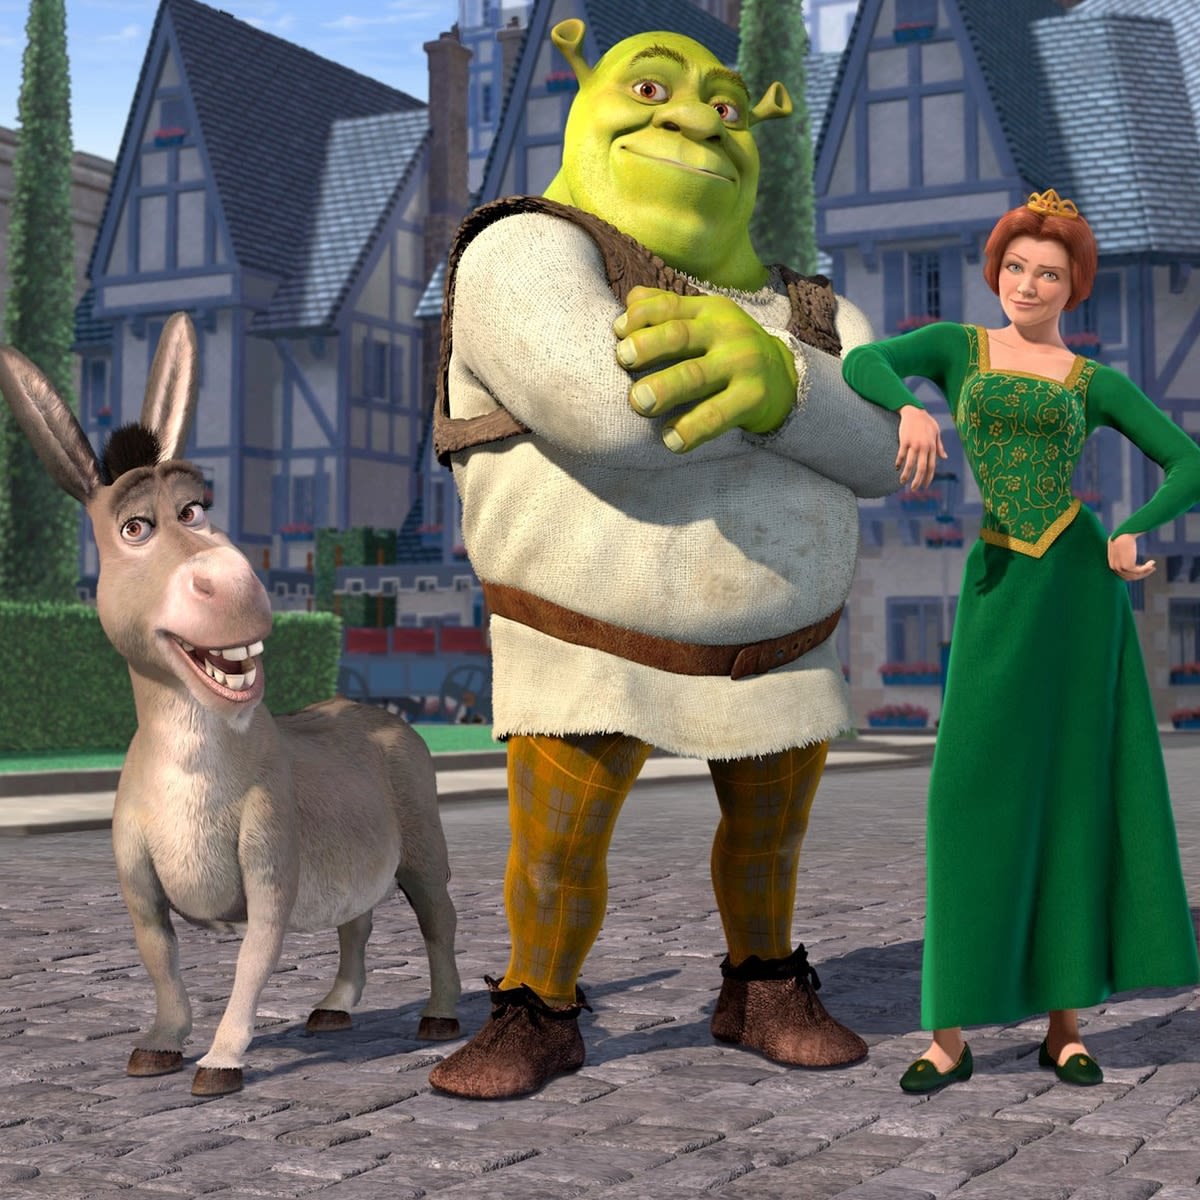 Shrek 5 's All-Star Cast and Release Date Revealed